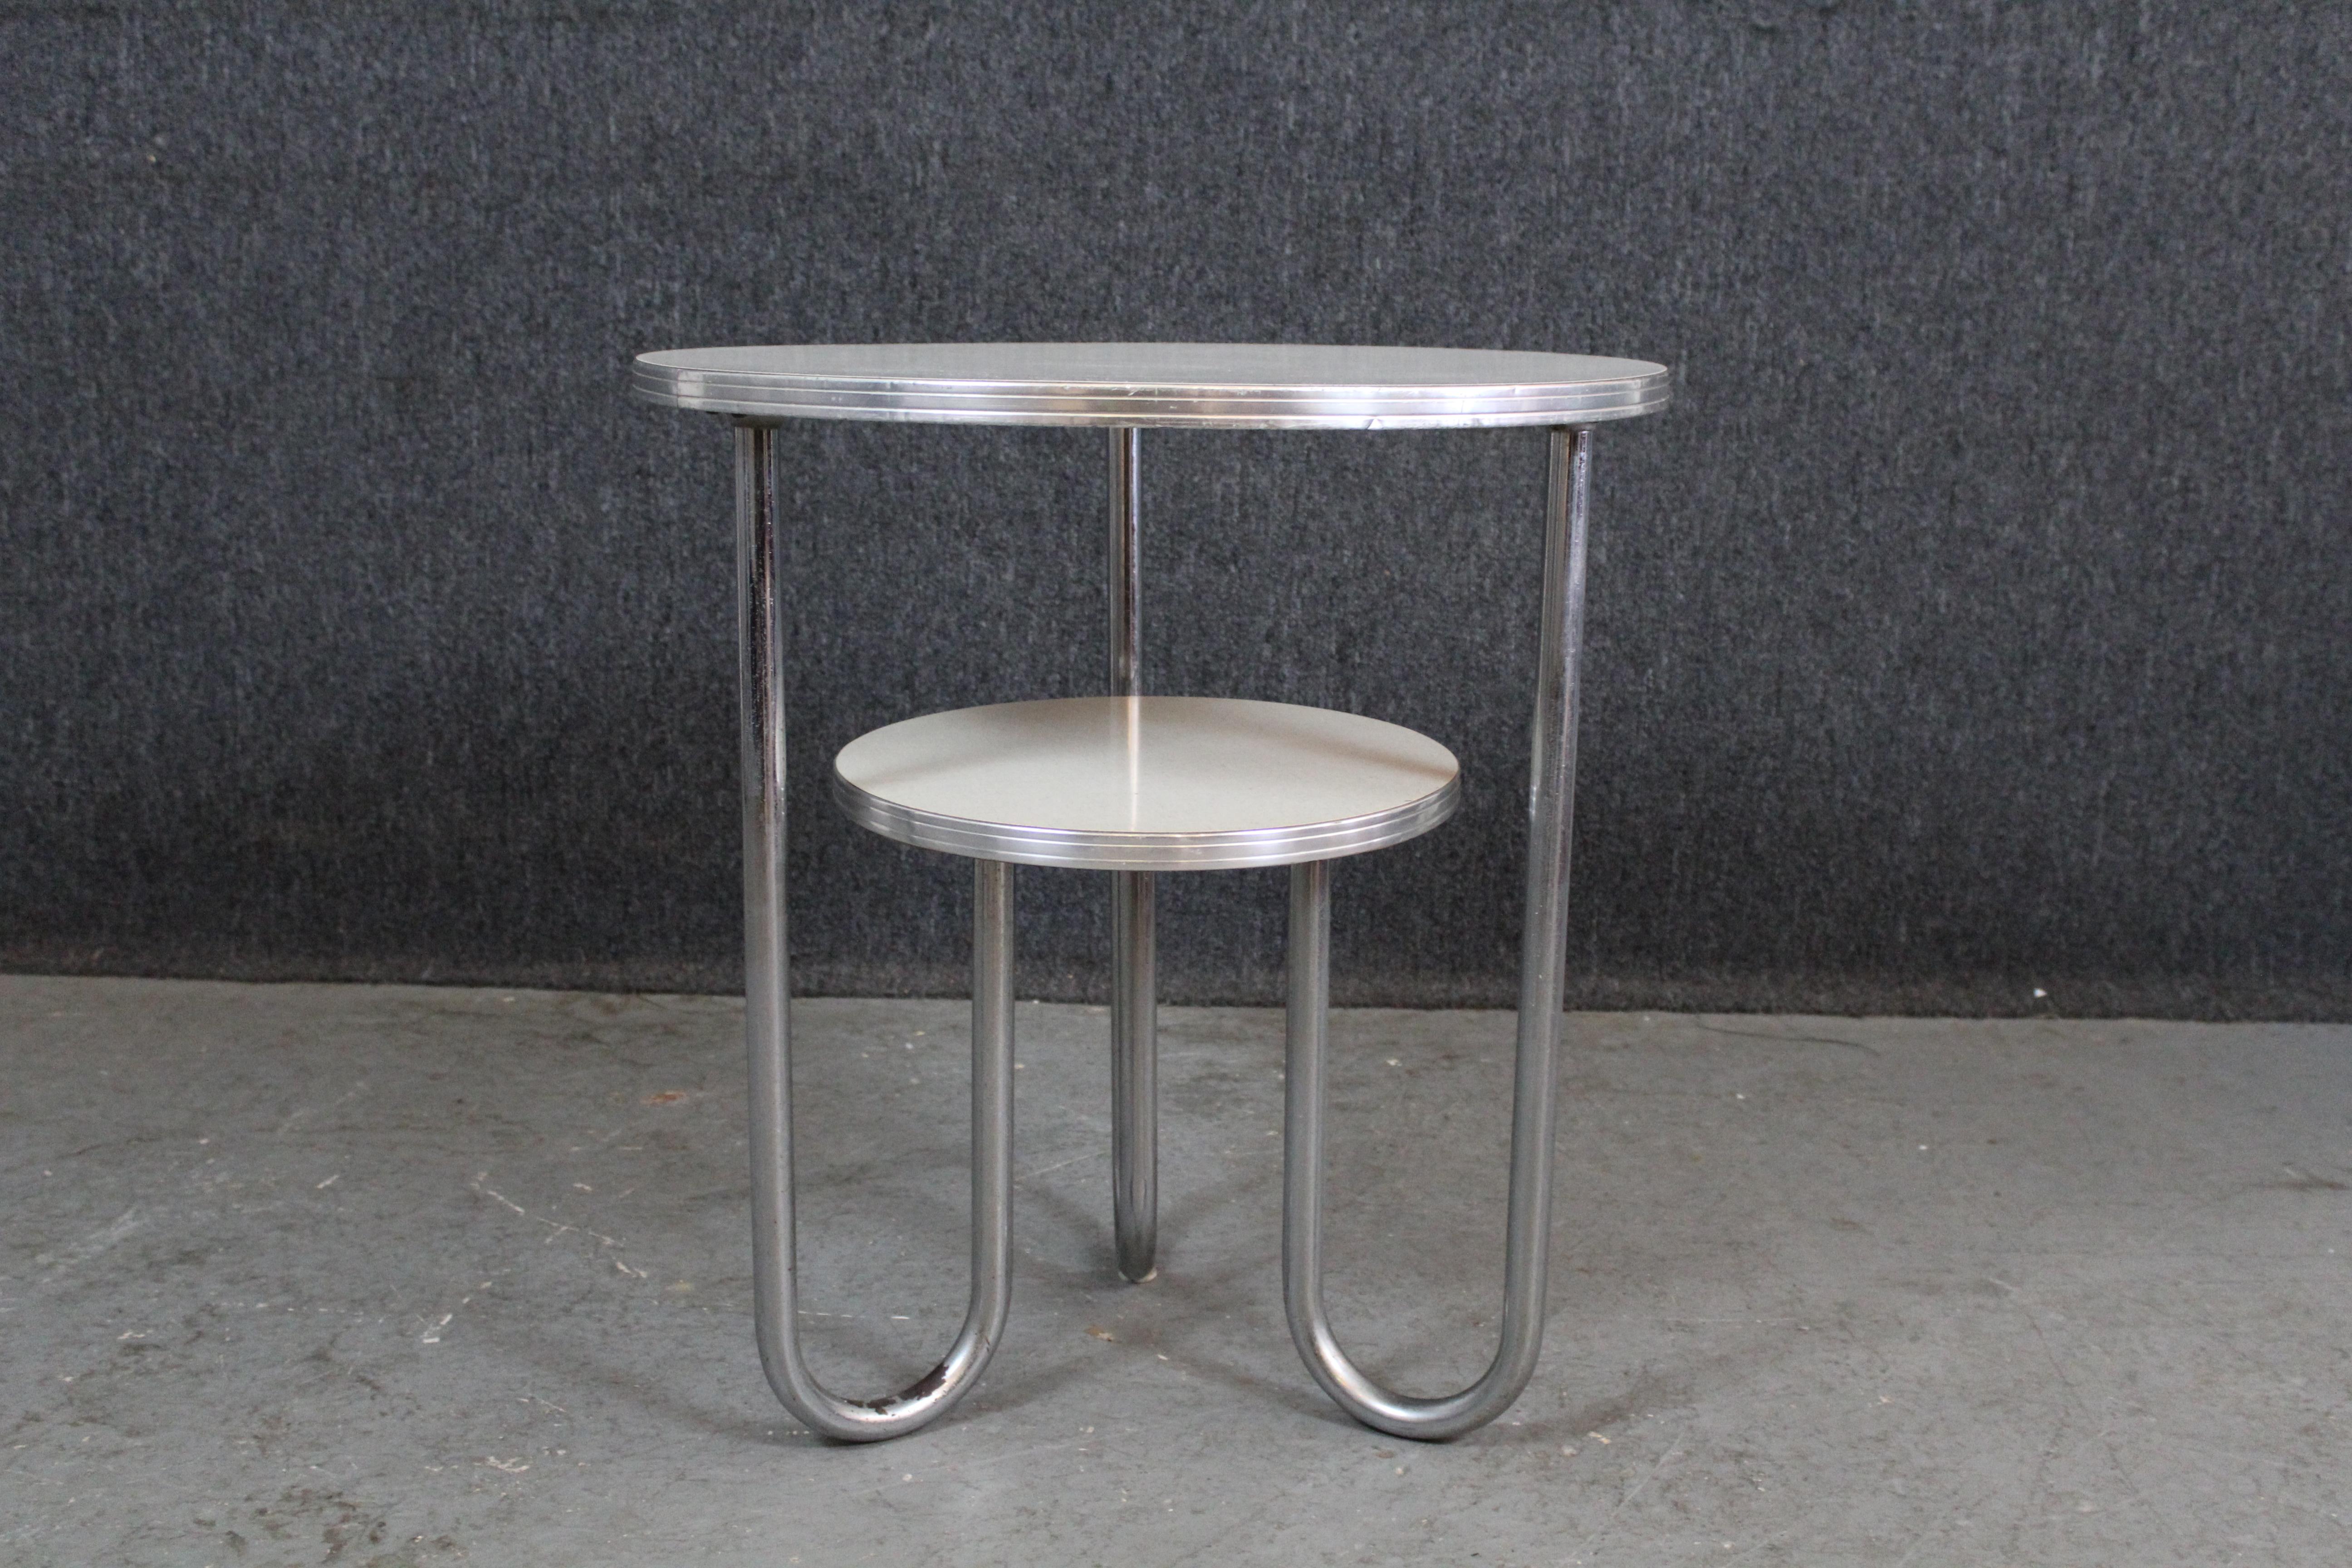 From the Bauhaus to your house, don't miss out on the magic of genuine Art Deco design by Wolfgang Hoffman for America's iconic Royal Chrome Furniture. With a chrome, tubular steel base and two tiered Formica tabletops, this petite yet practical